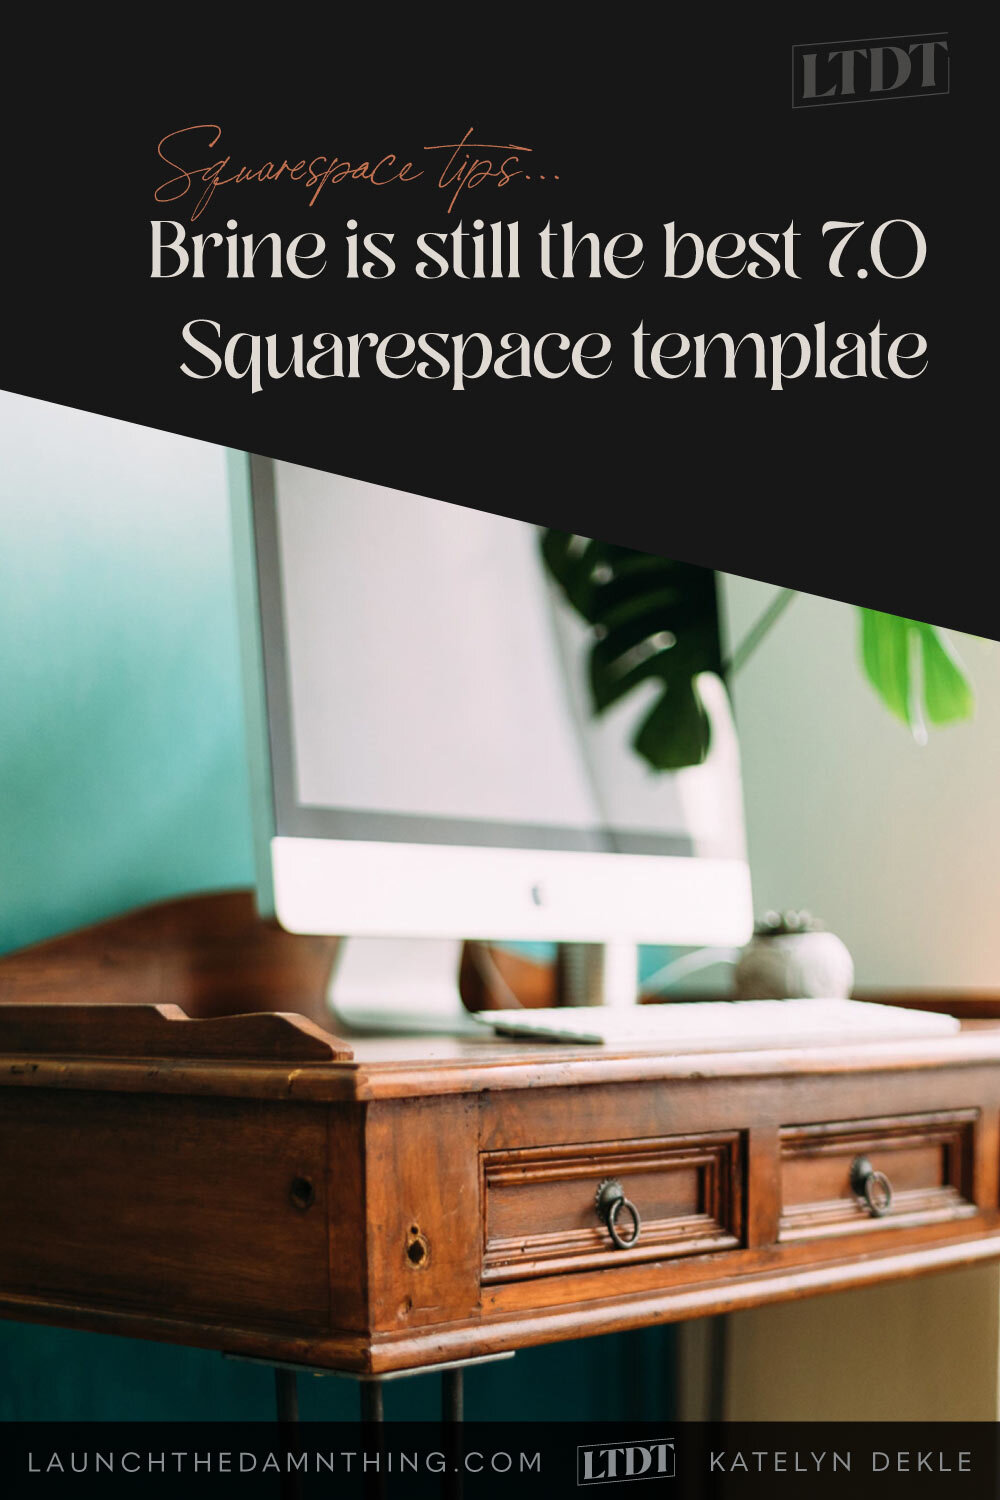 lidelse snap krabbe The Brine Family are still the best Squarespace 7.0 templates ▪️ Launch the  Damn Thing! | Squarespace Website Designer